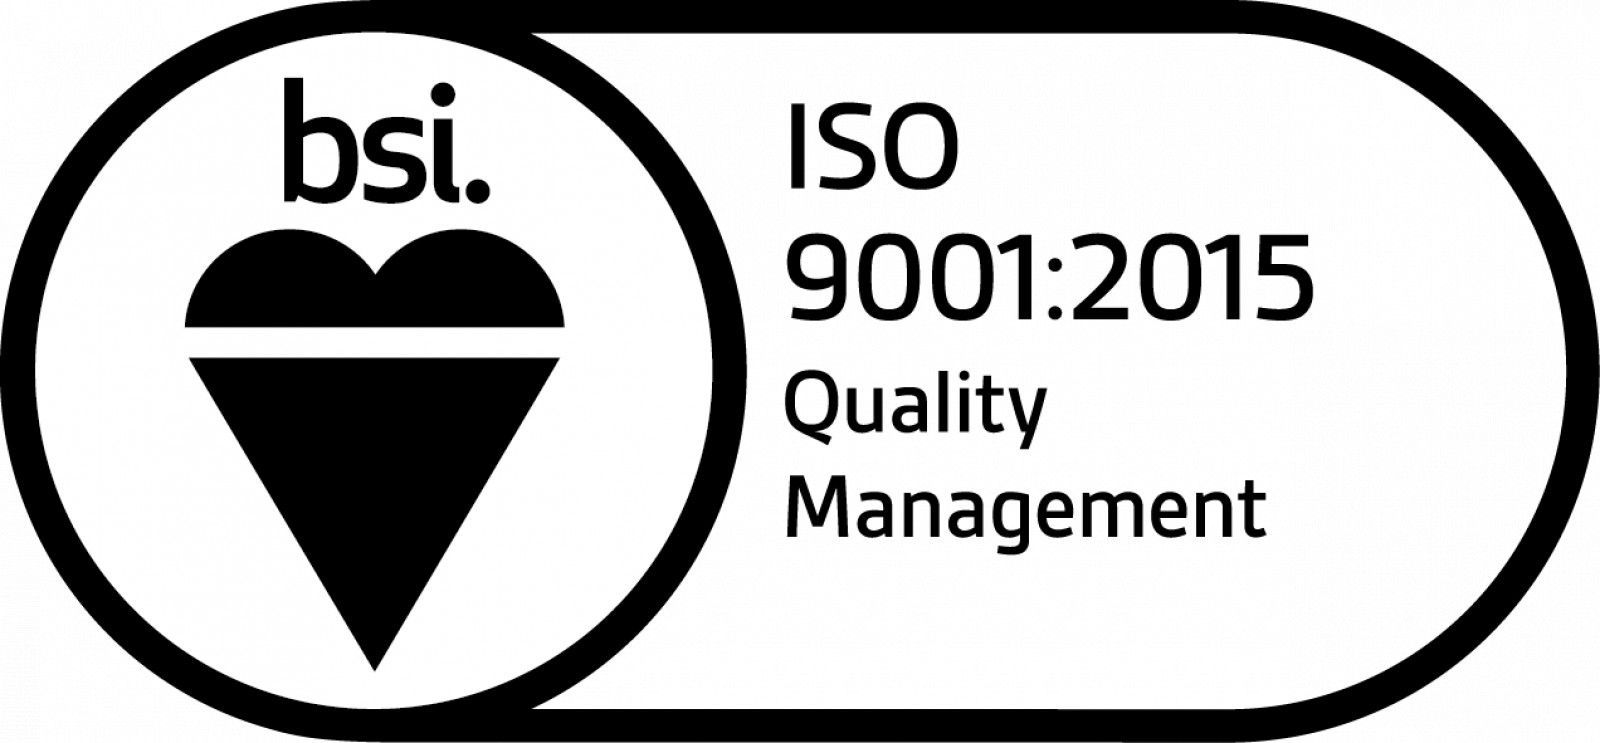 Mackart Additive sign up with BSI to achieve AS910...